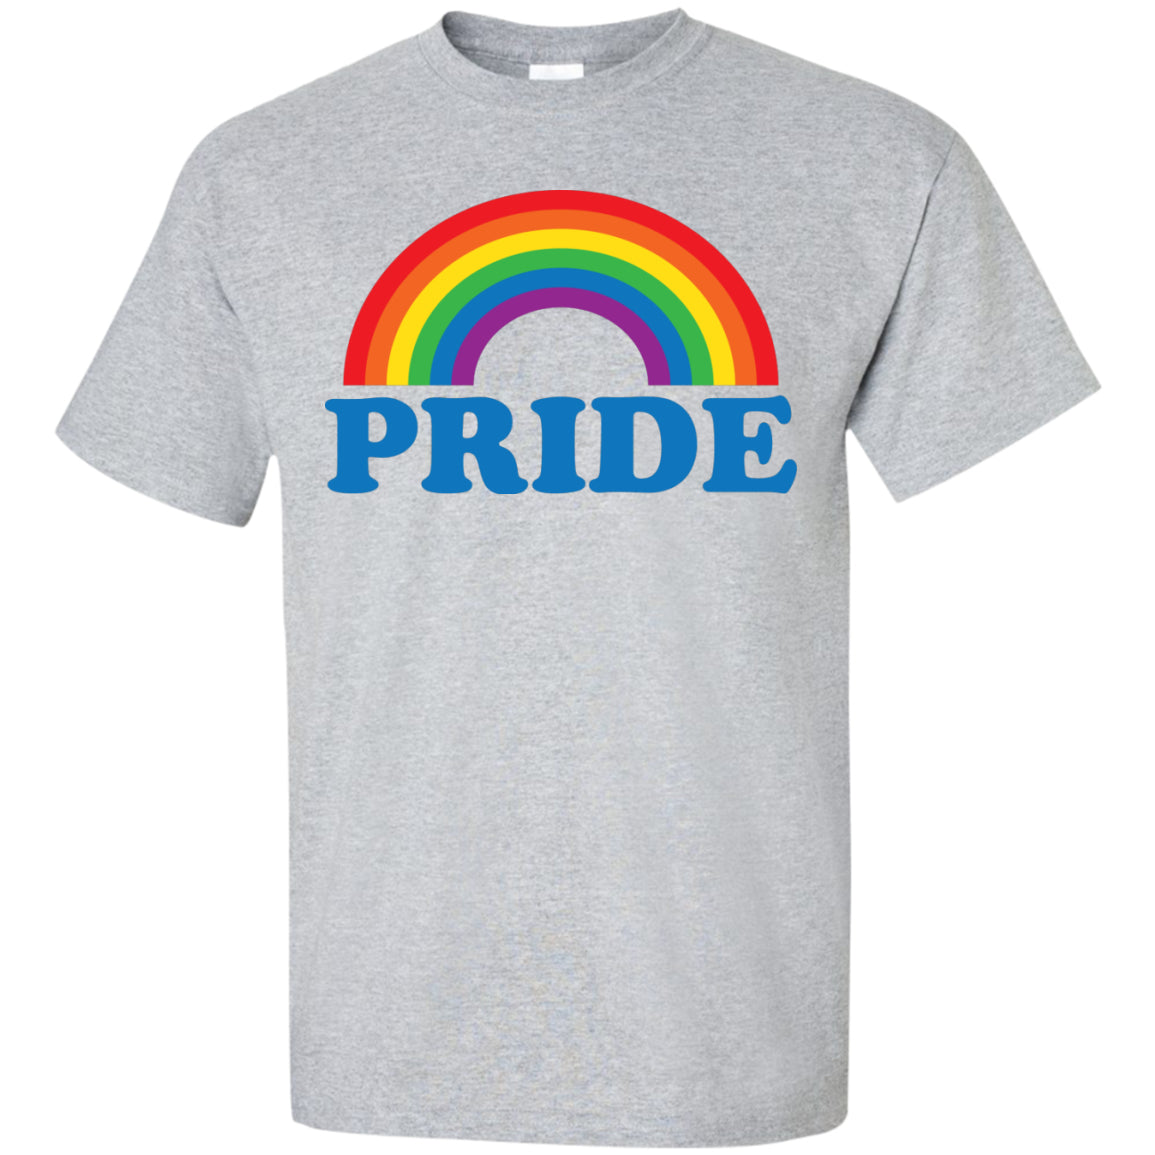 gay pride colors 2021 clothing